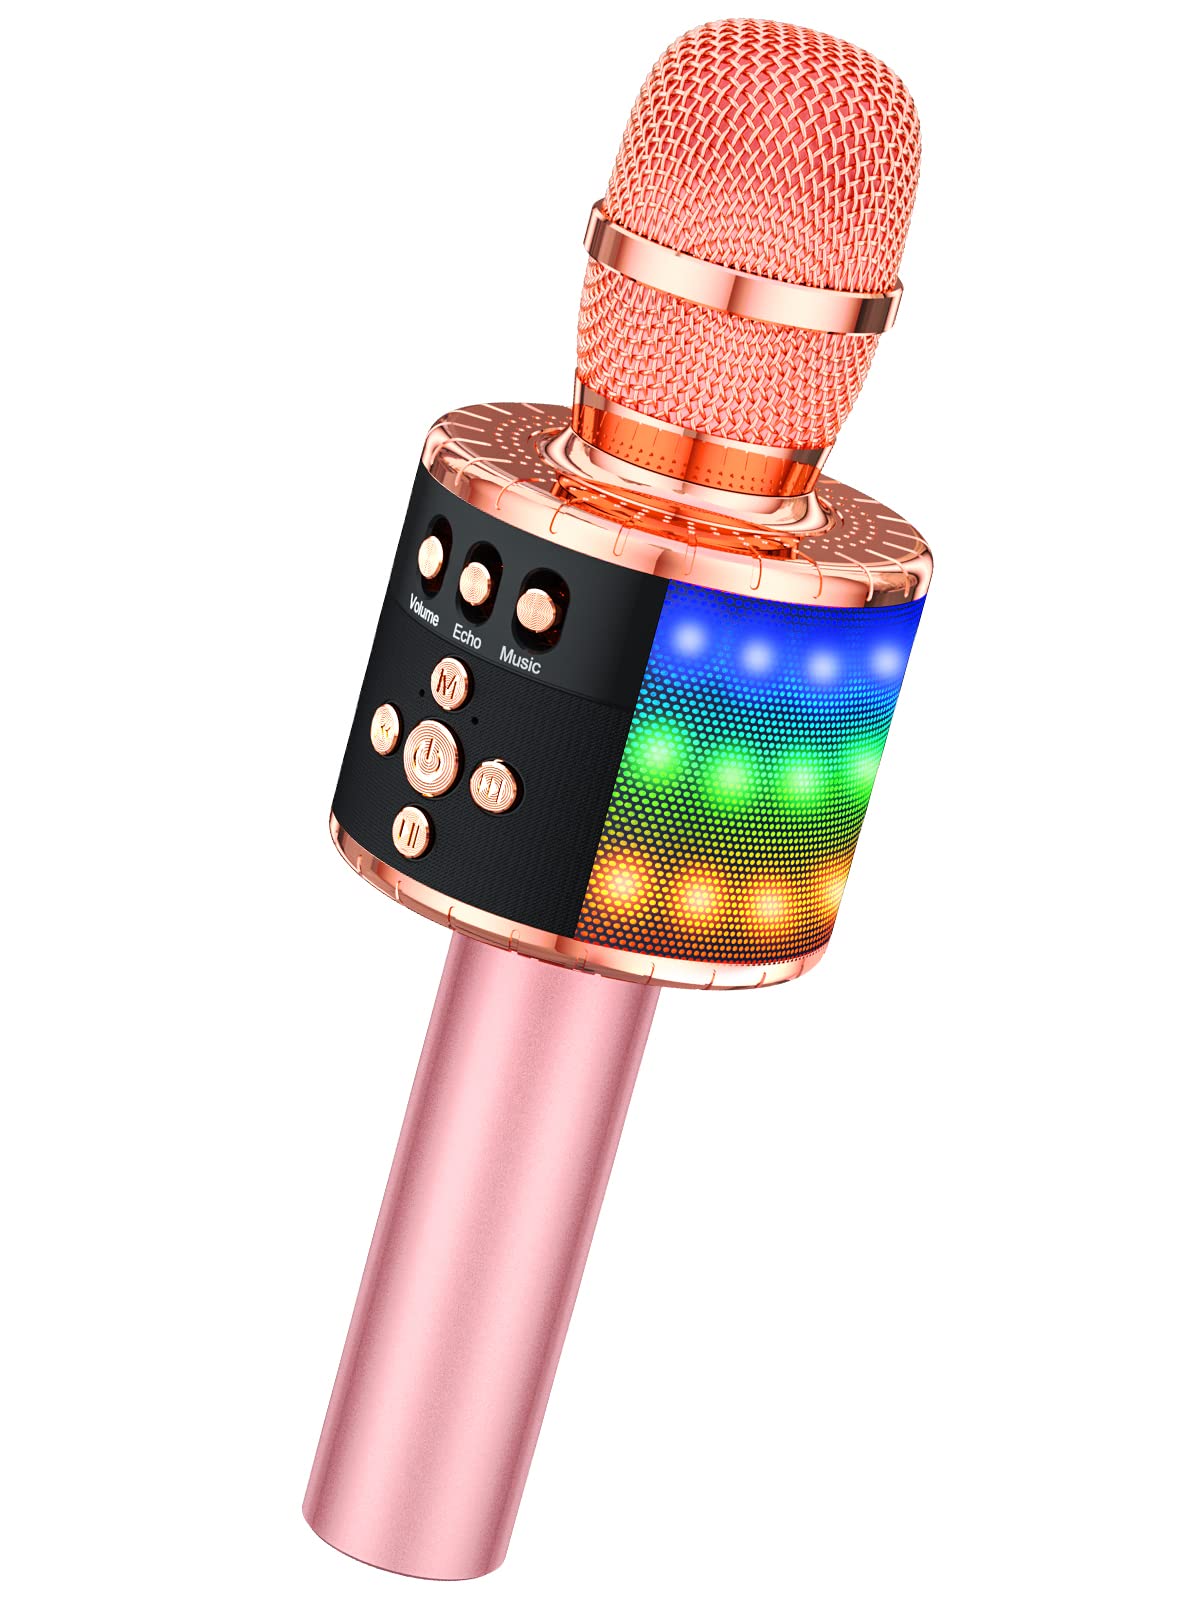 BONAOK Wireless Bluetooth Karaoke Microphone with Controllable LED Lights, 4-in-1 Portable Handheld Mic Speaker for All Smartphones, Birthday for Kids Adults All Age Q78(Rose Gold)